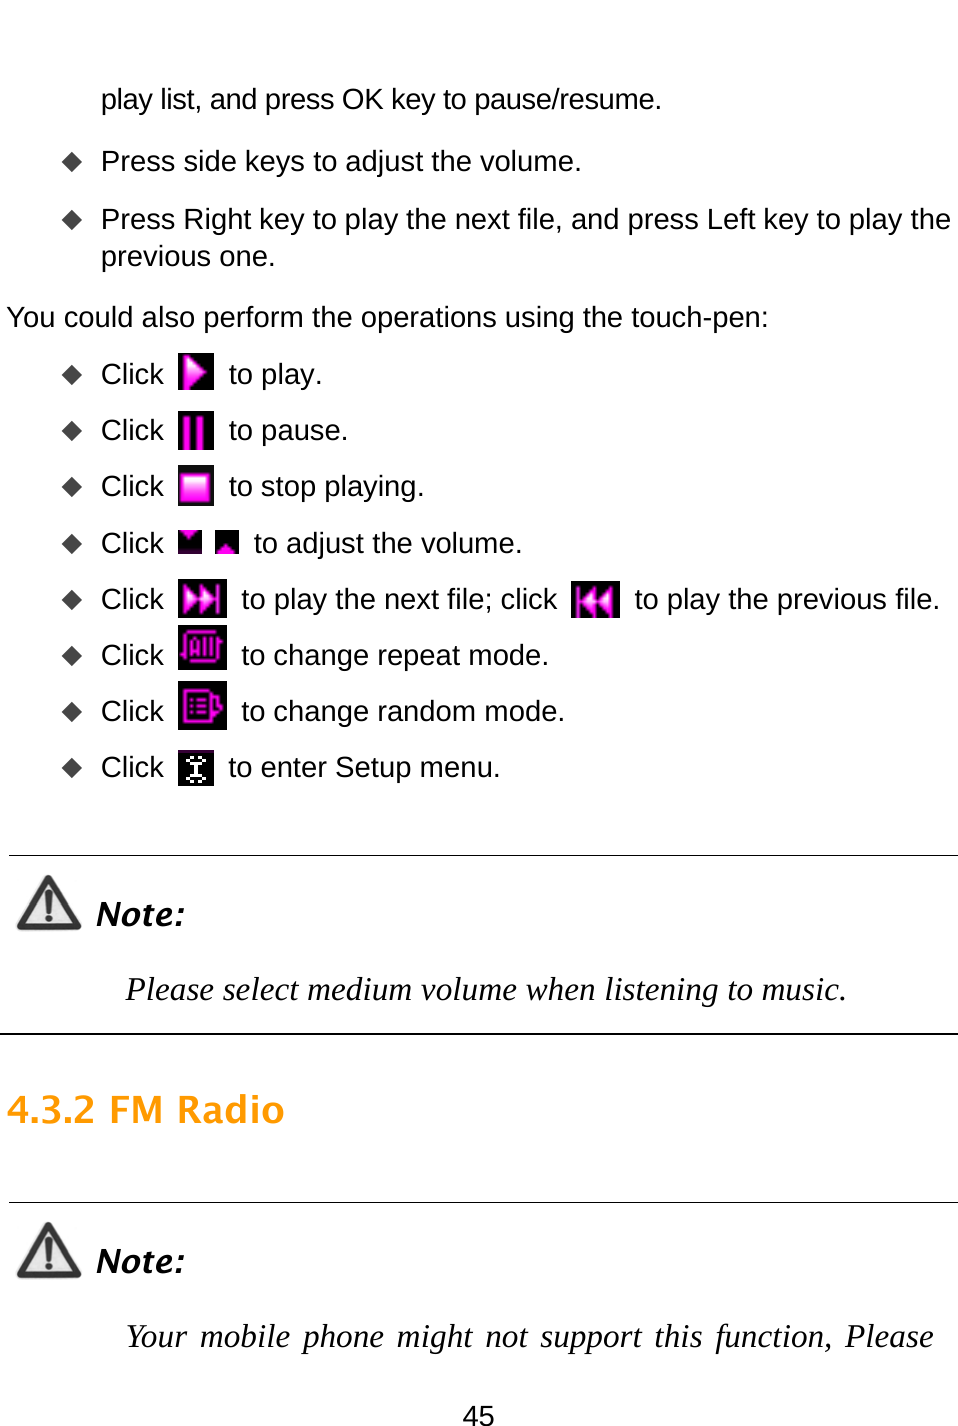  45 play list, and press OK key to pause/resume.    Press side keys to adjust the volume.    Press Right key to play the next file, and press Left key to play the previous one.   You could also perform the operations using the touch-pen:    Click  to play.  Click  to pause.  Click  to stop playing.  Click    to adjust the volume.  Click   to play the next file; click   to play the previous file.  Click   to change repeat mode.  Click   to change random mode.  Click   to enter Setup menu.  Note: Please select medium volume when listening to music.  4.3.2 FM Radio  Note: Your mobile phone might not support this function, Please 